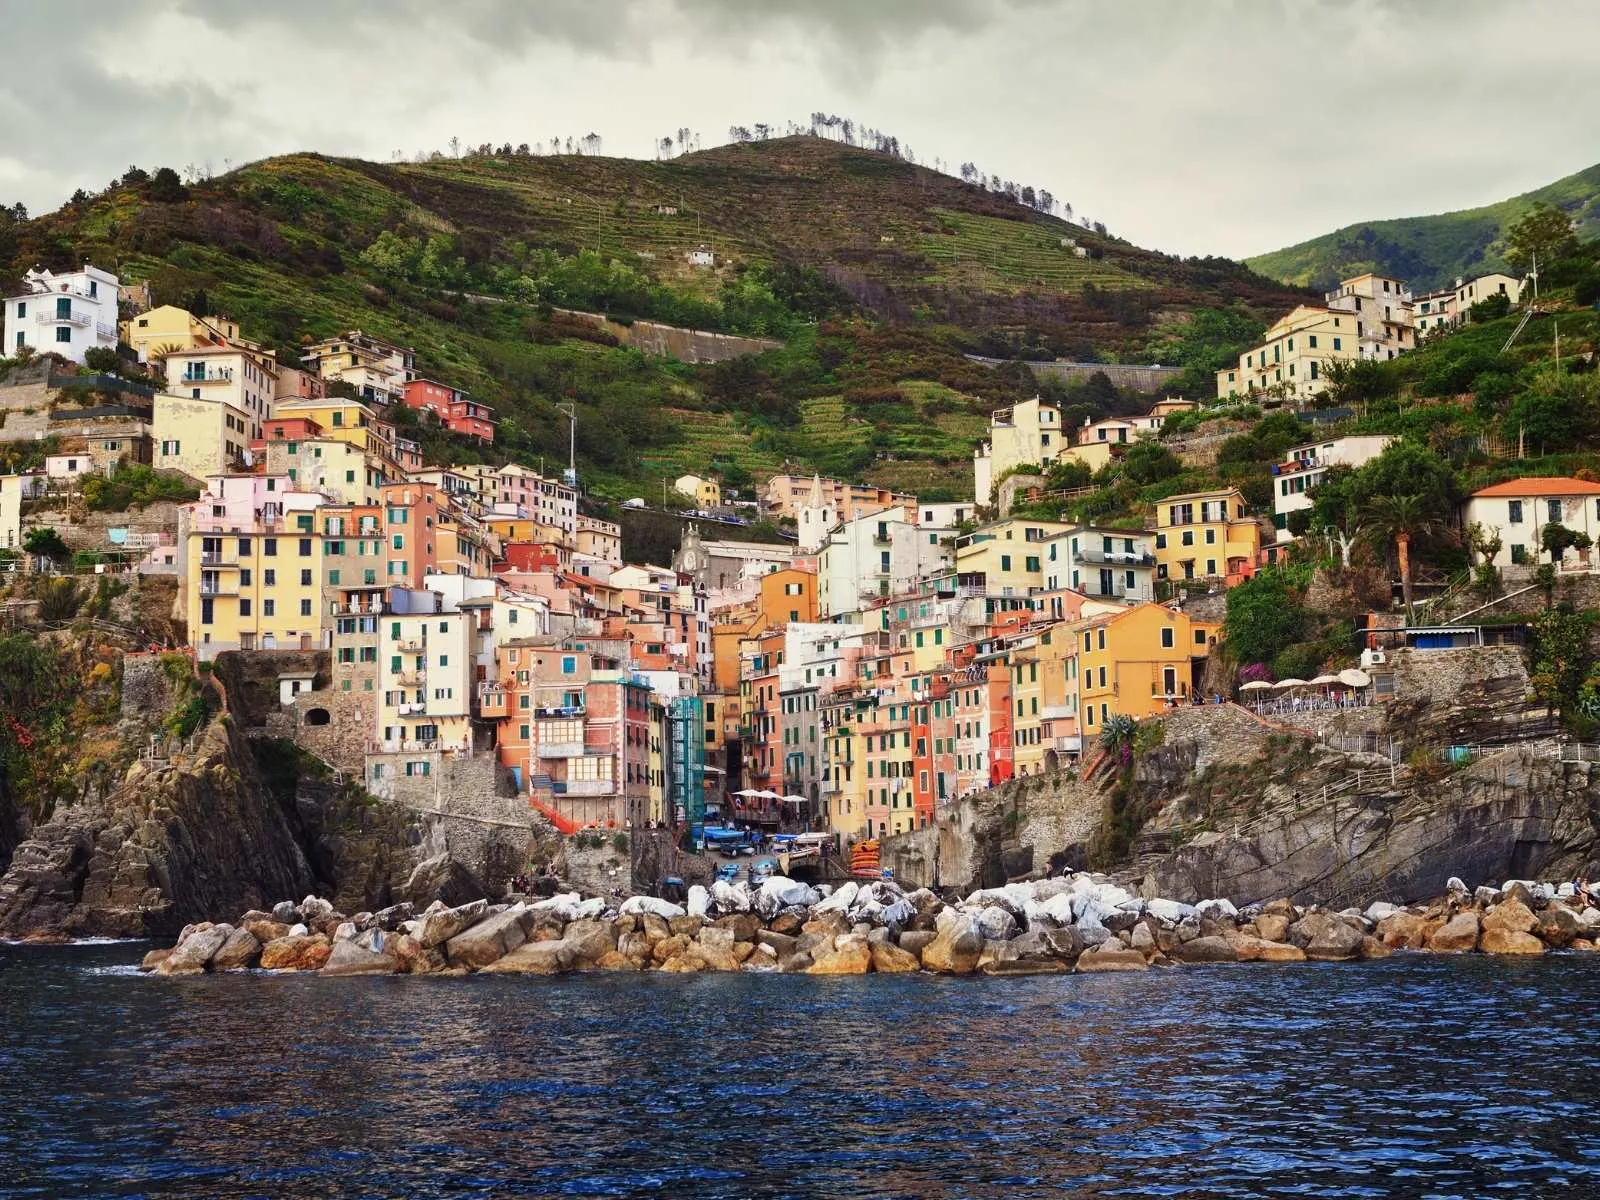 one of the towns of Cinque Terre